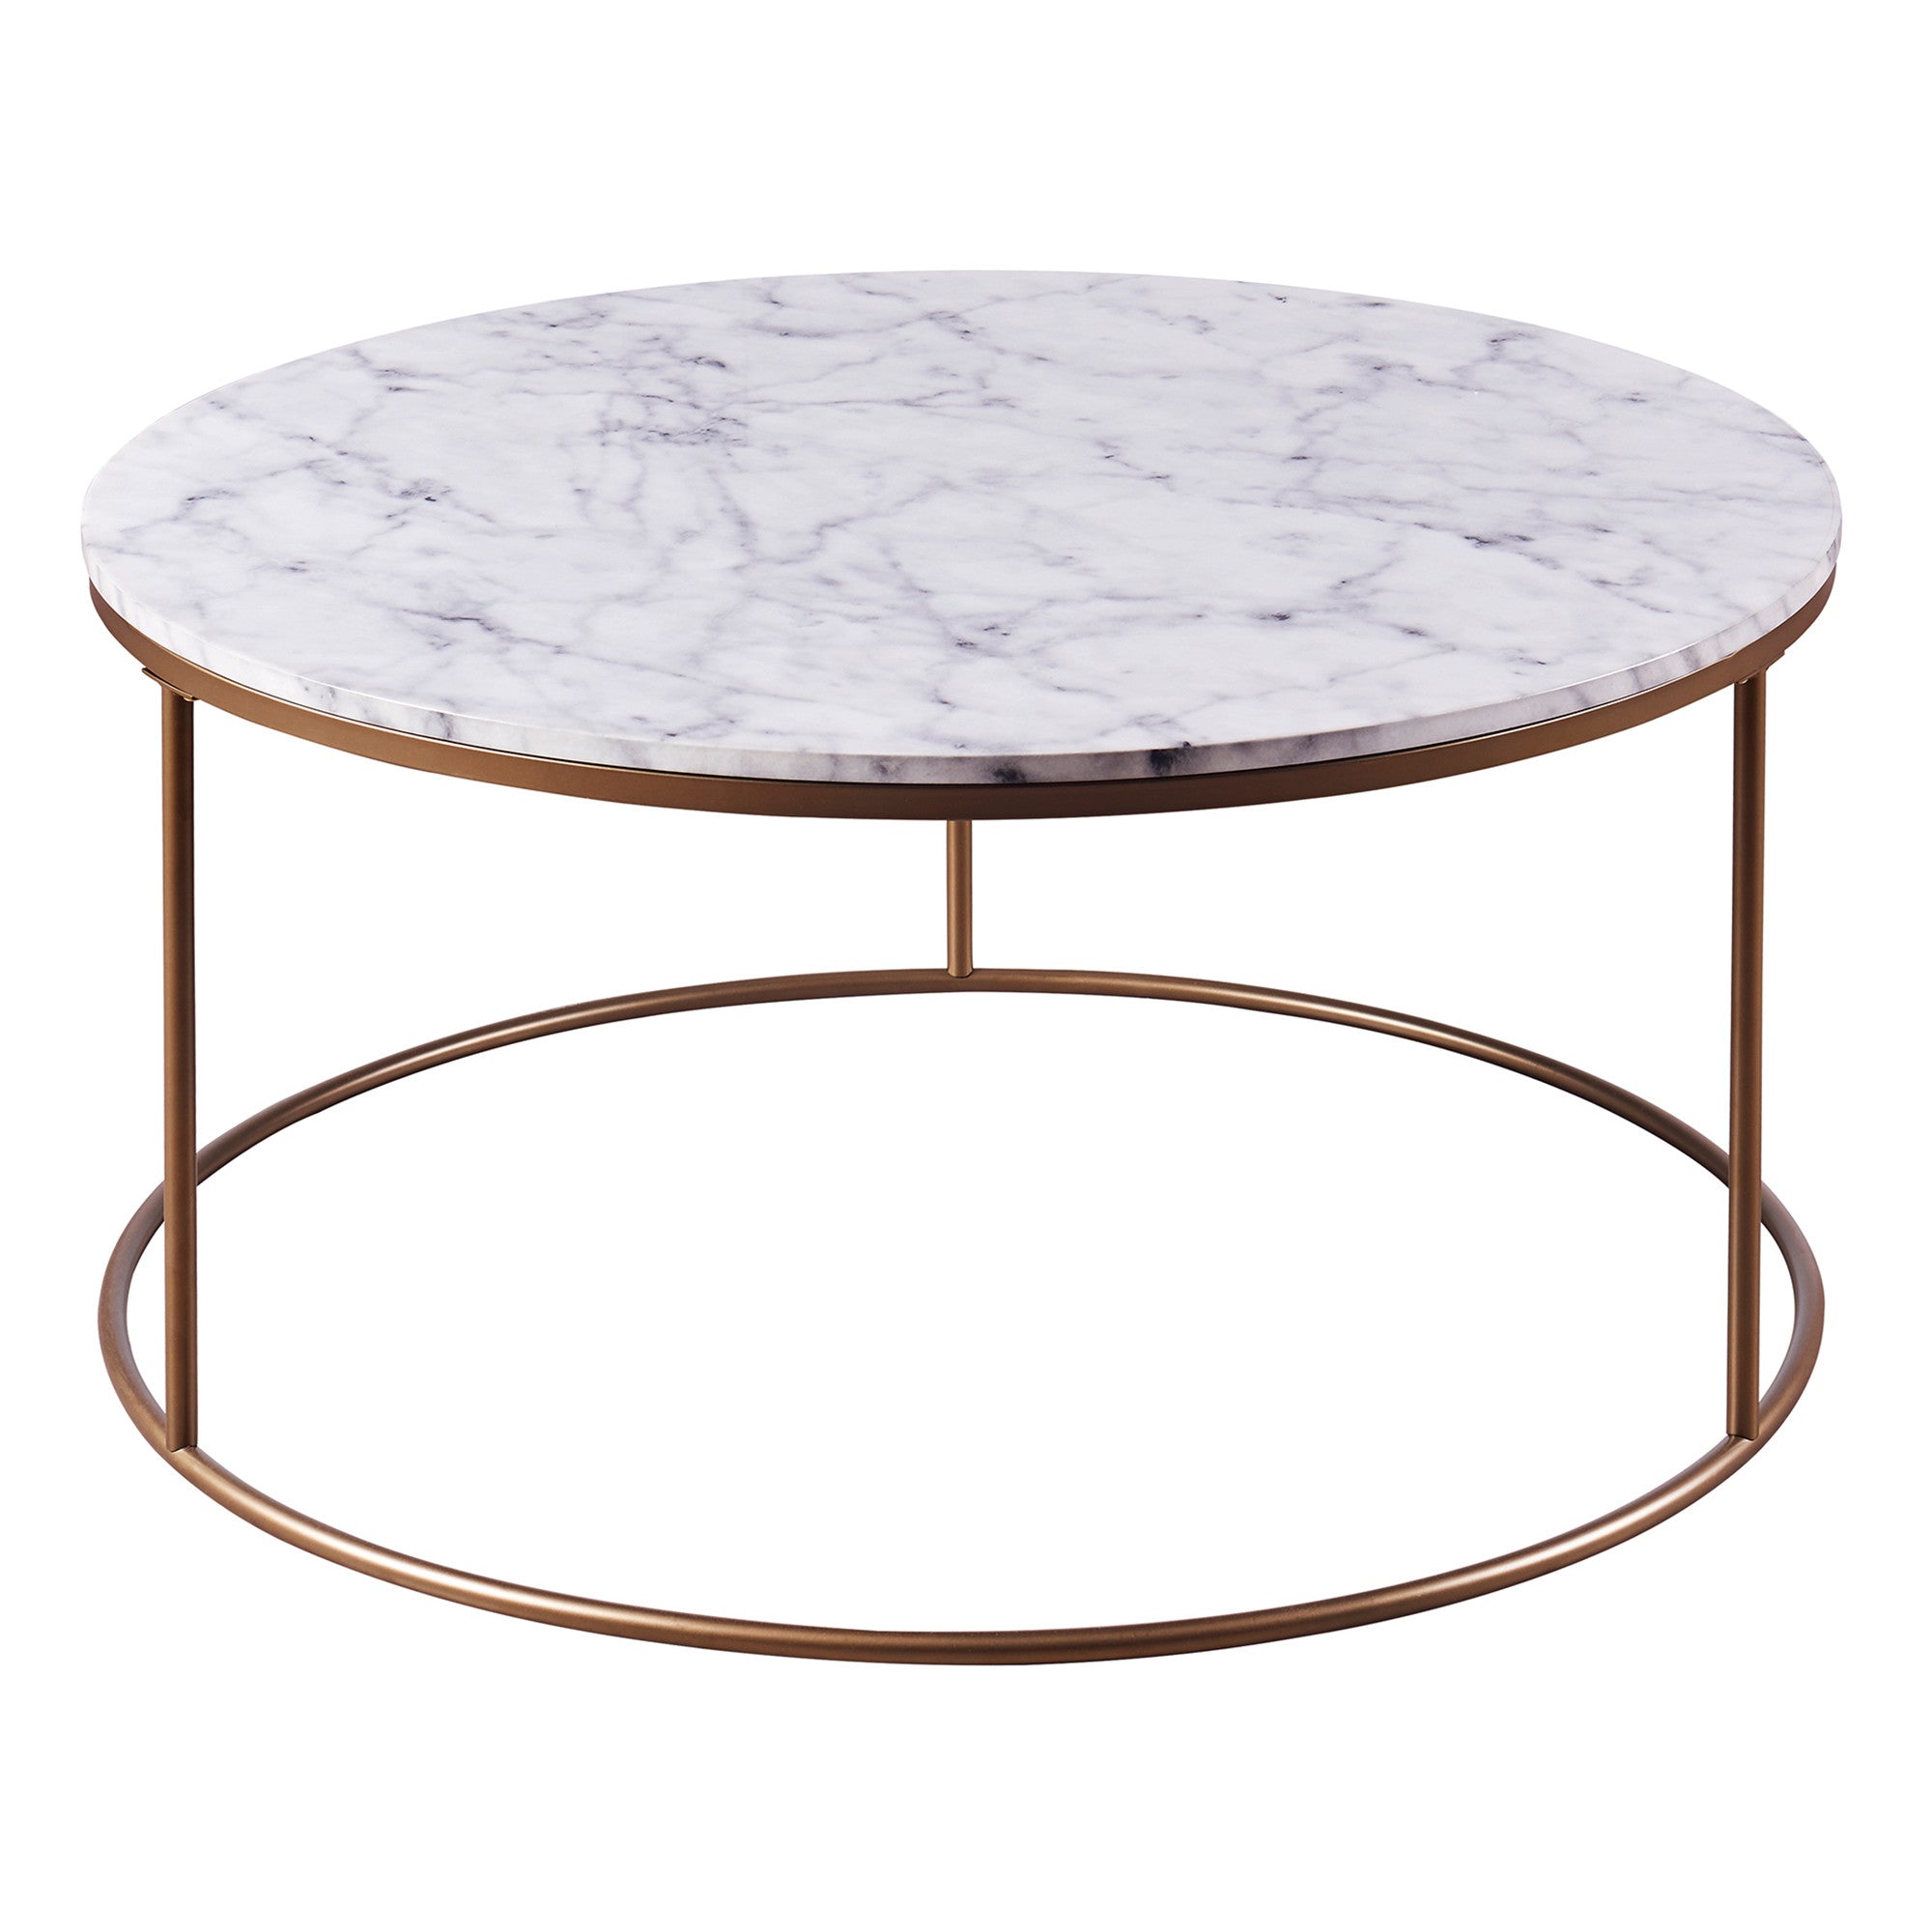 Teamson Home Marmo Modern Marble-Look Round Coffee Table, Marble/Brass